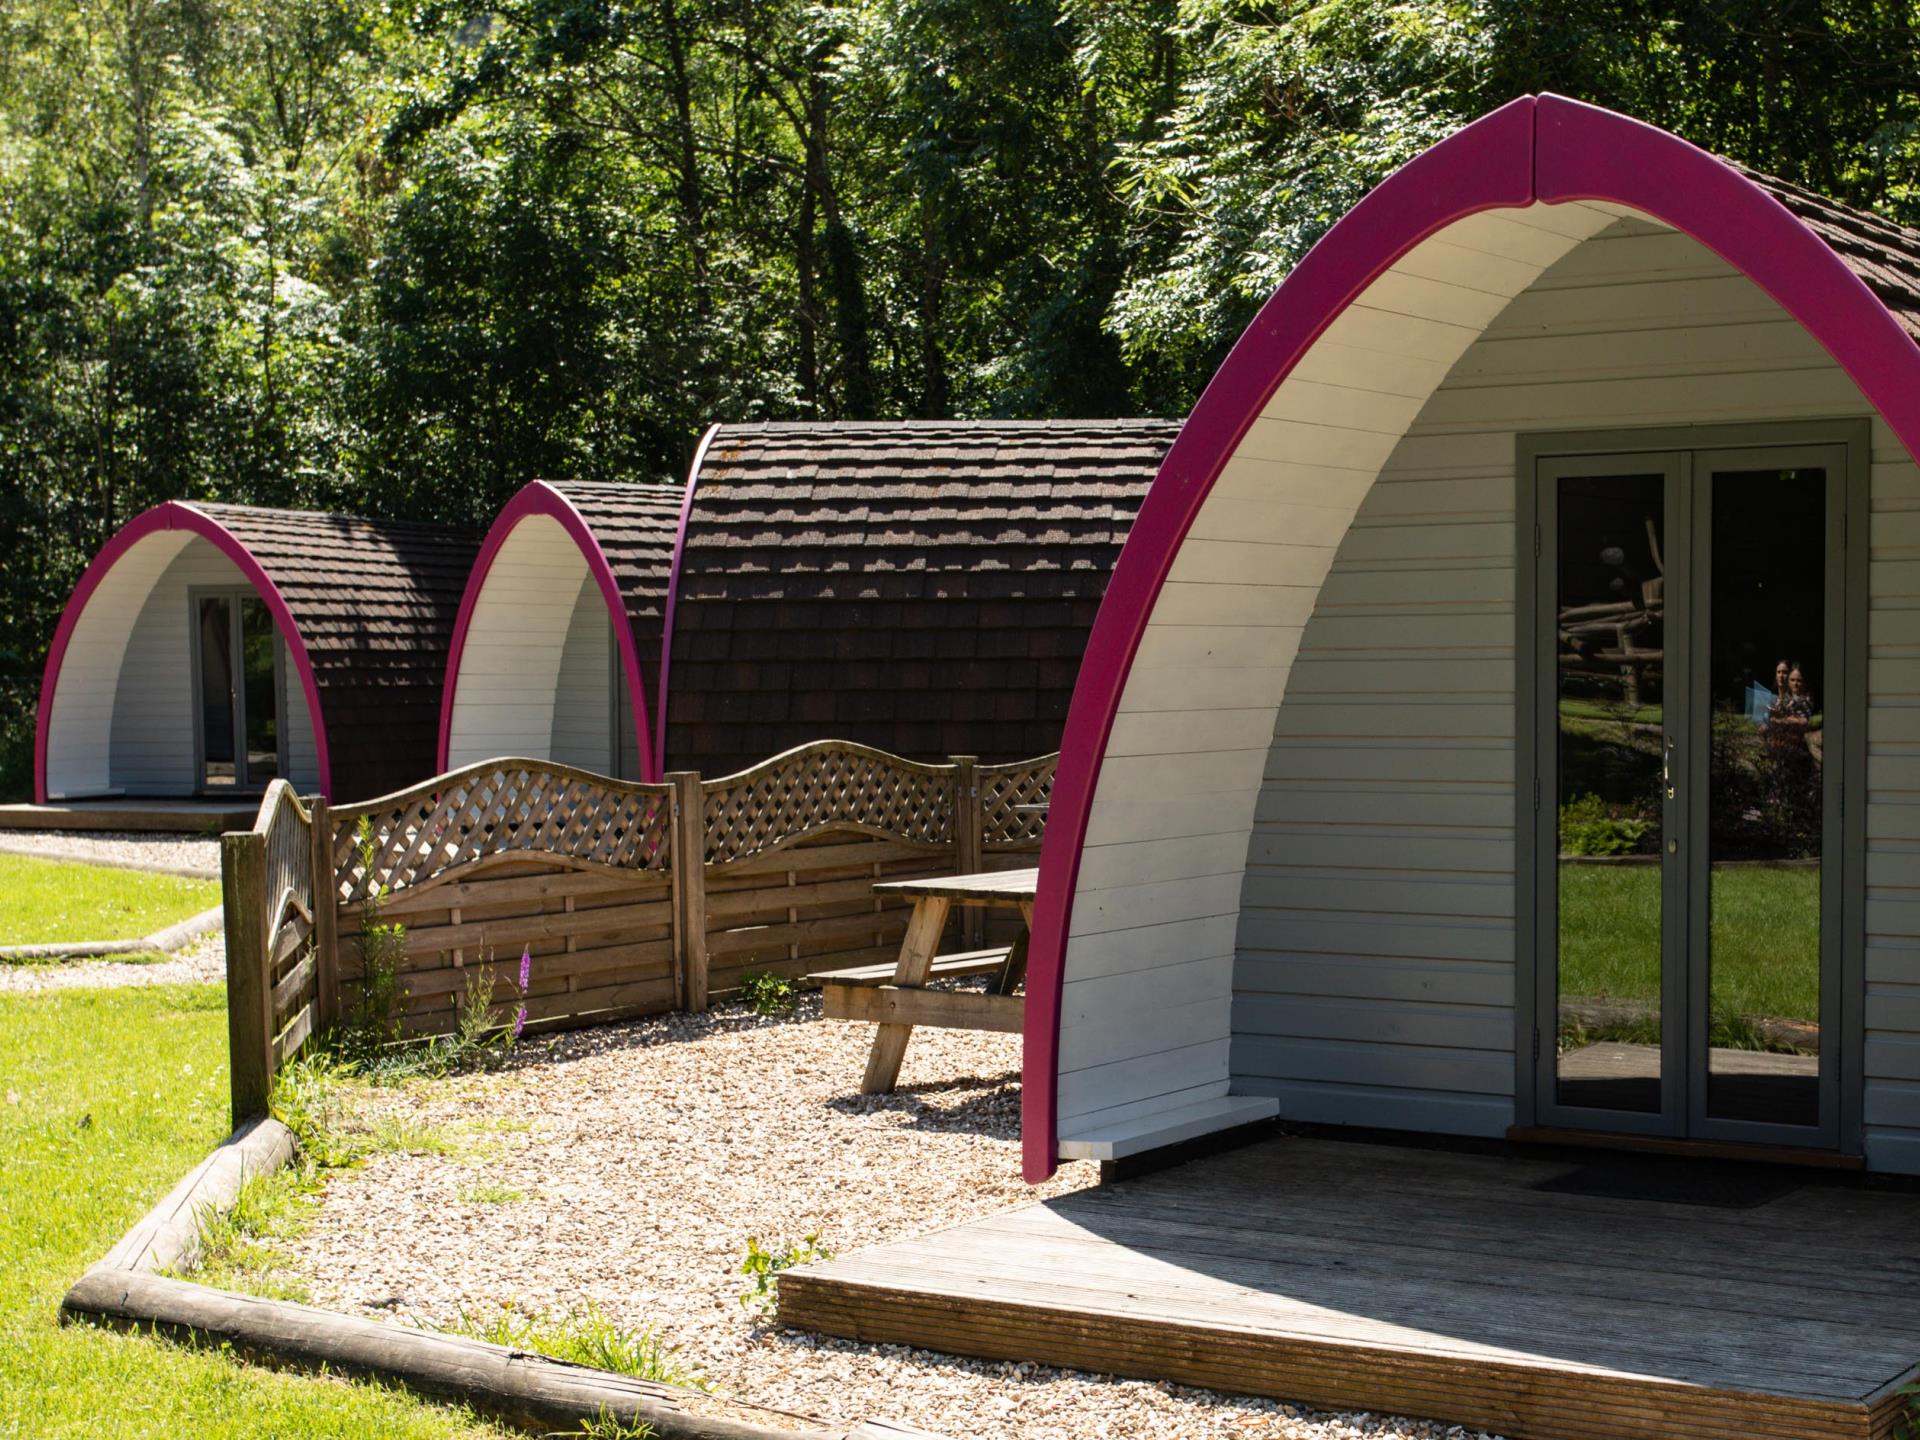 Glamping Pods at Cwmcarn Forest